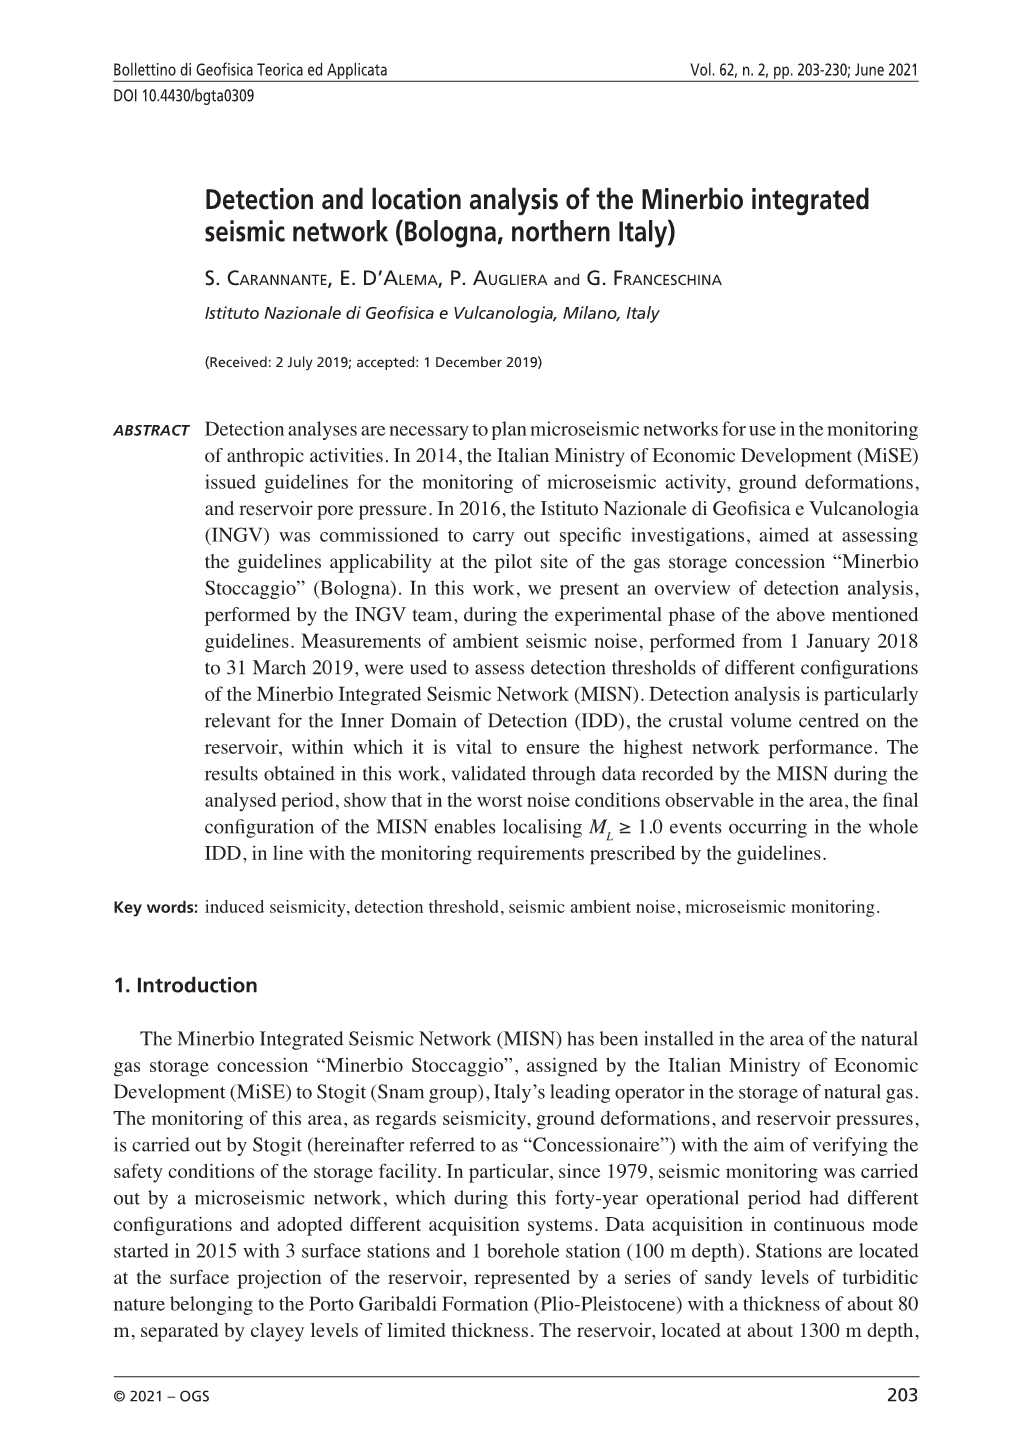 Detection and Location Analysis of the Minerbio Integrated Seismic Network (Bologna, Northern Italy)